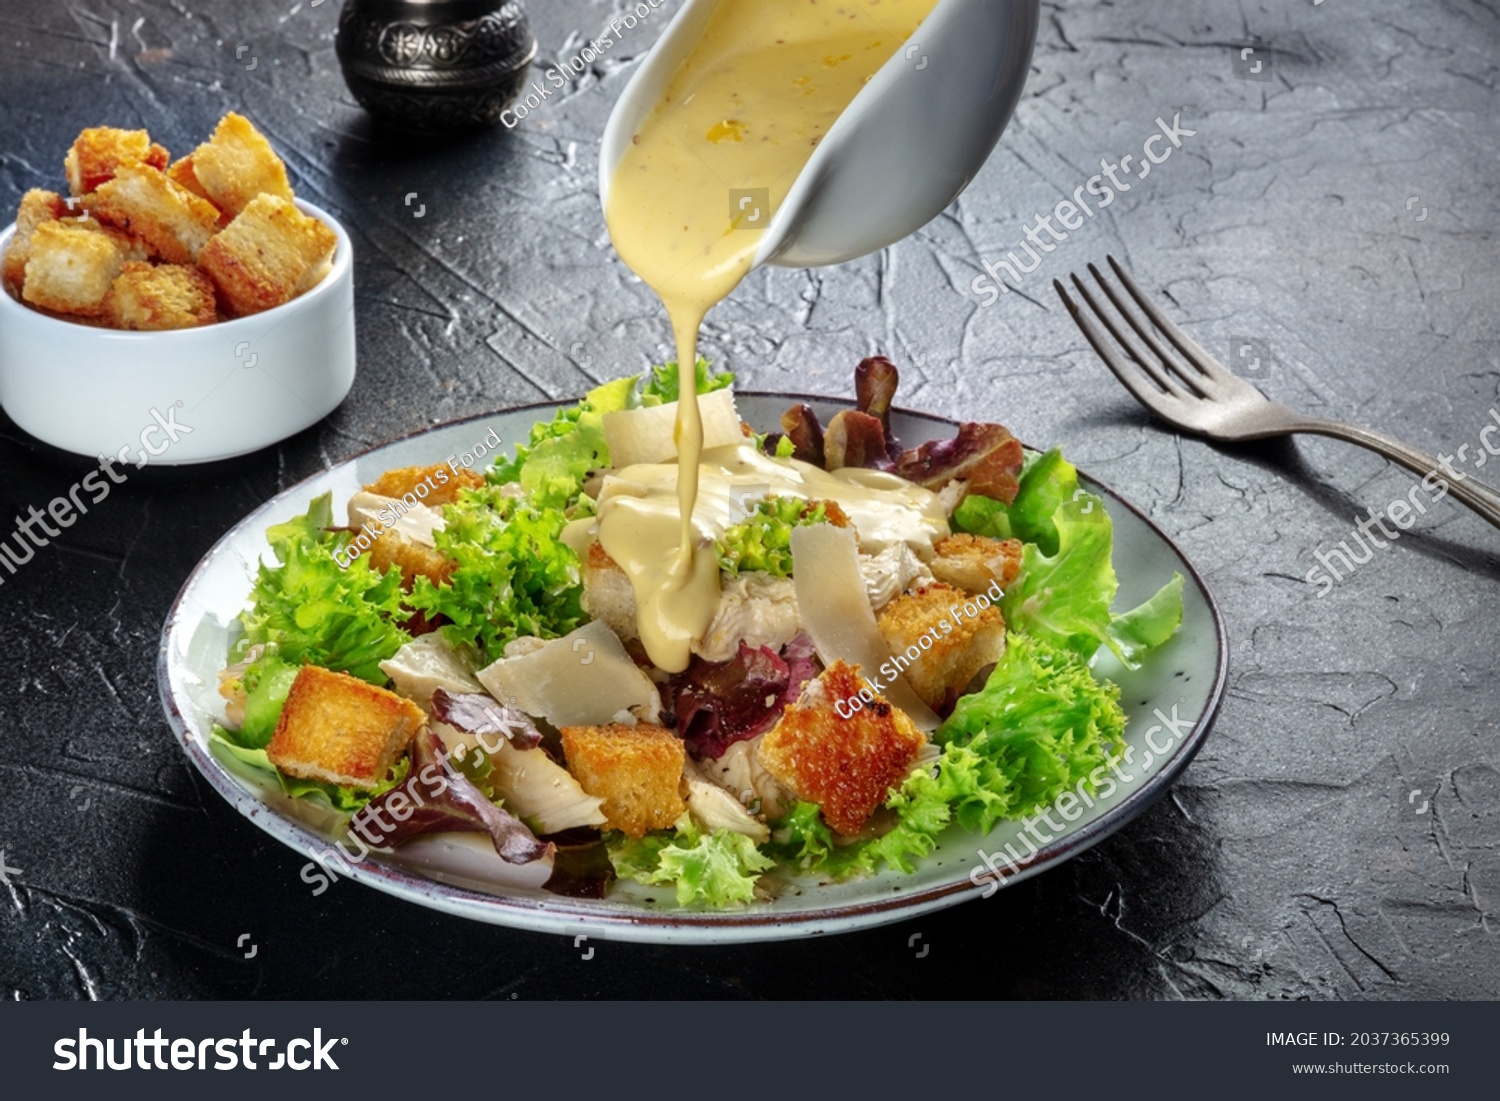 Chicken Caesar salad with the classic dressing being poured, croutons, and pepper, on a black background #2037365399